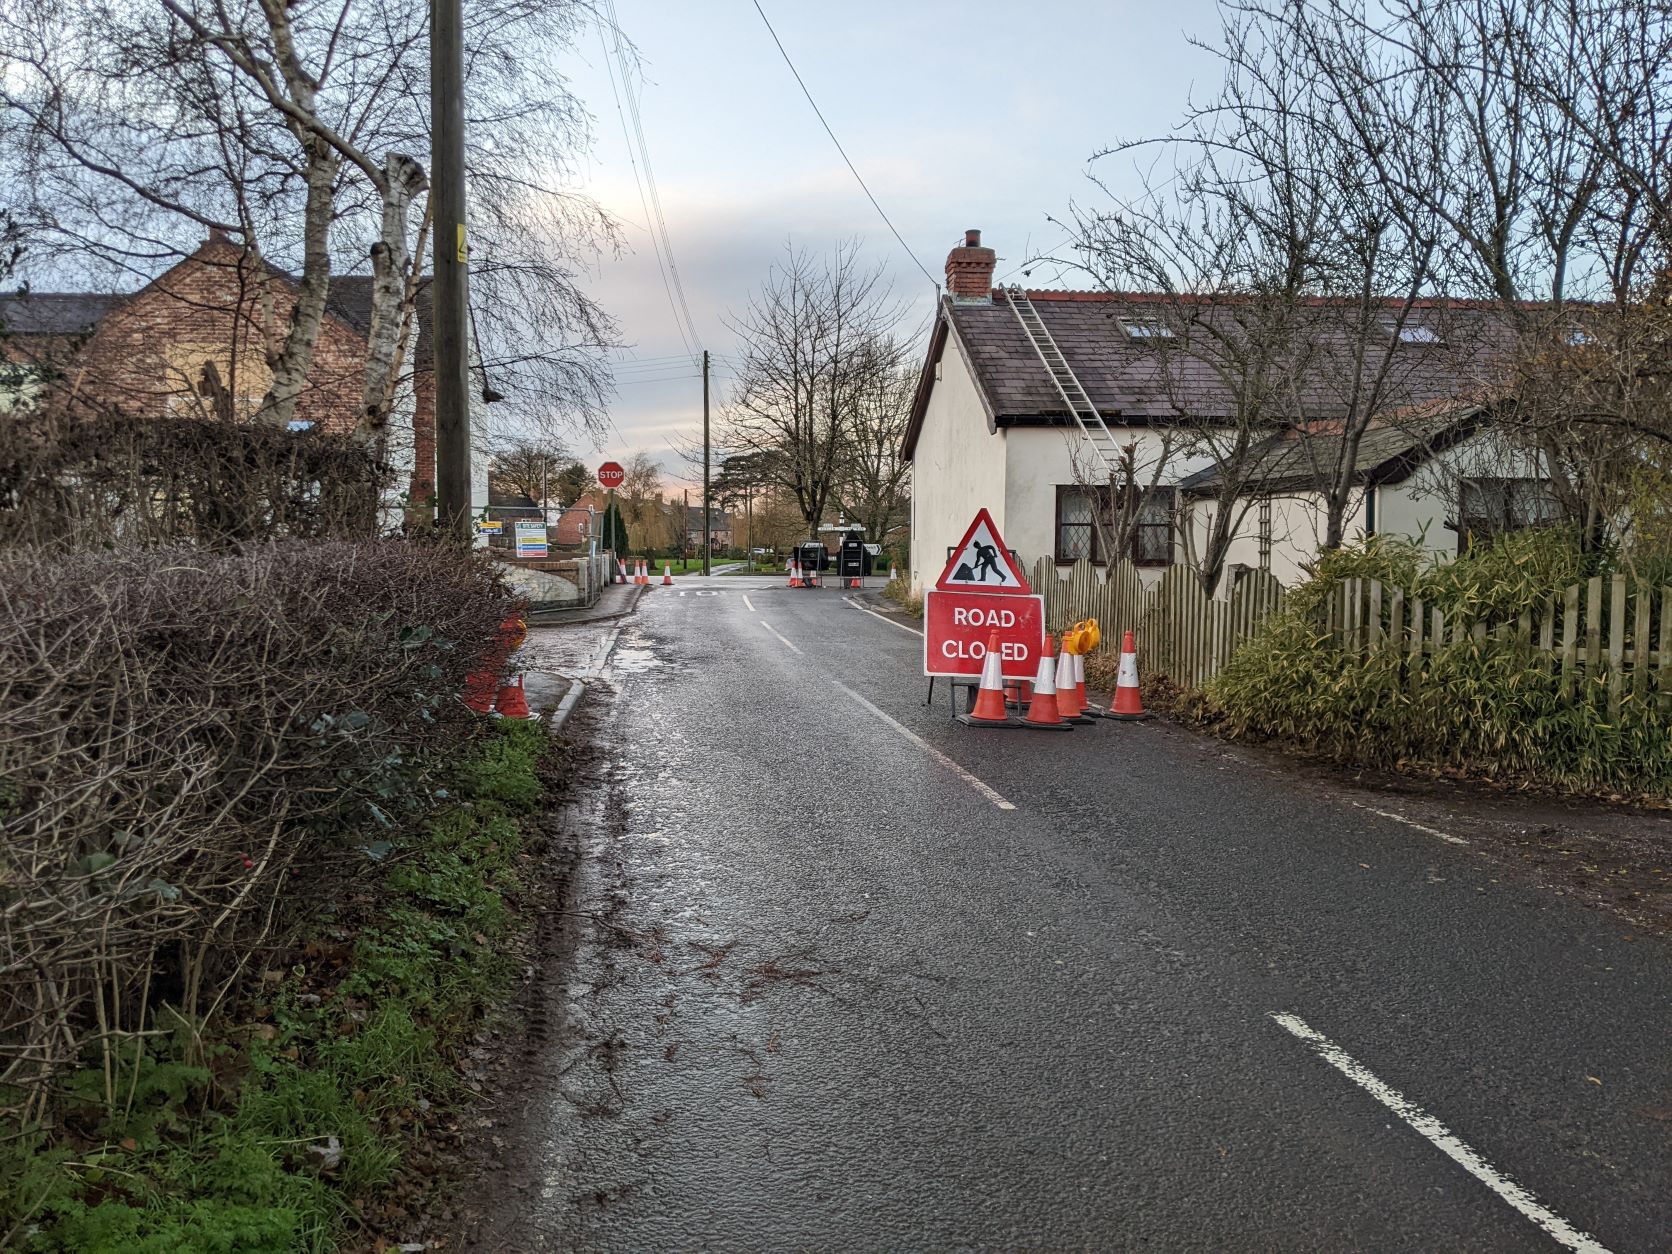 The expected roadworks?, December 6th